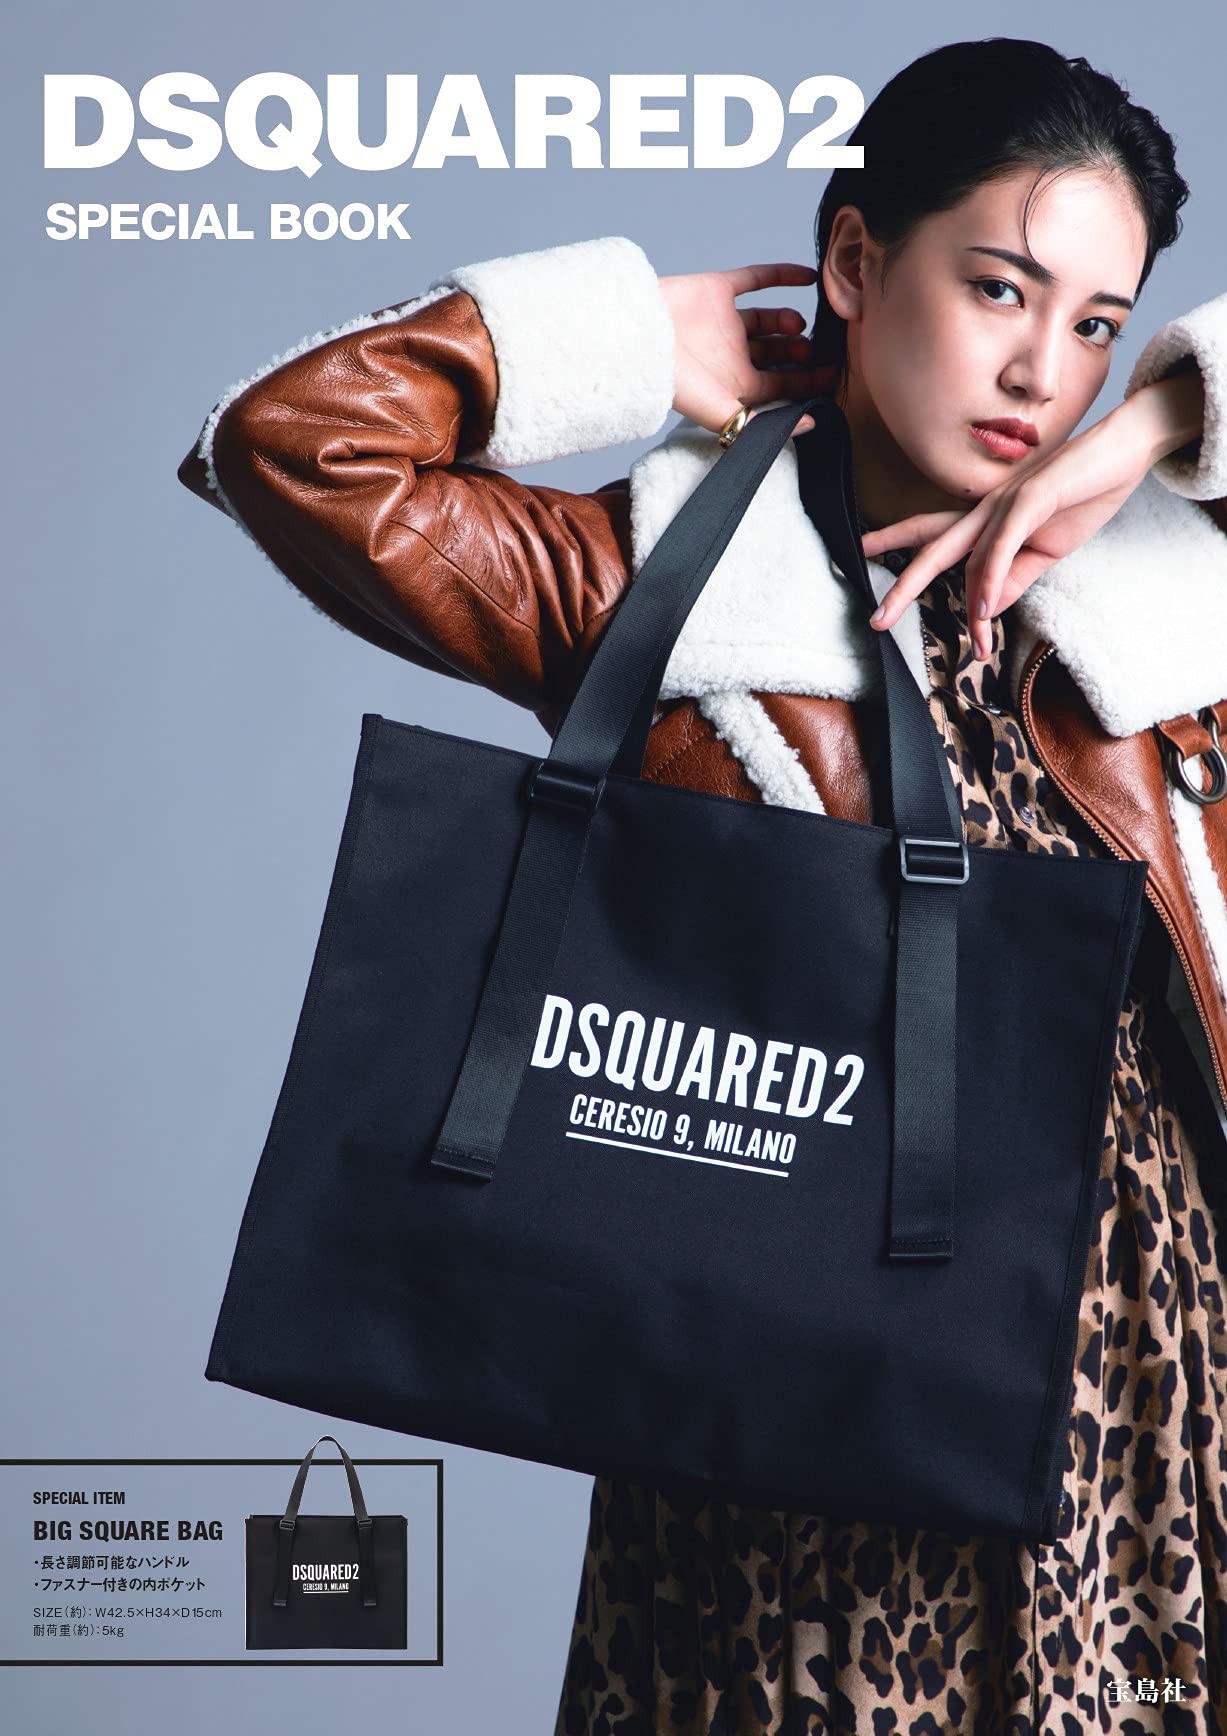 DSQUARED2 SPECIAL BOOK